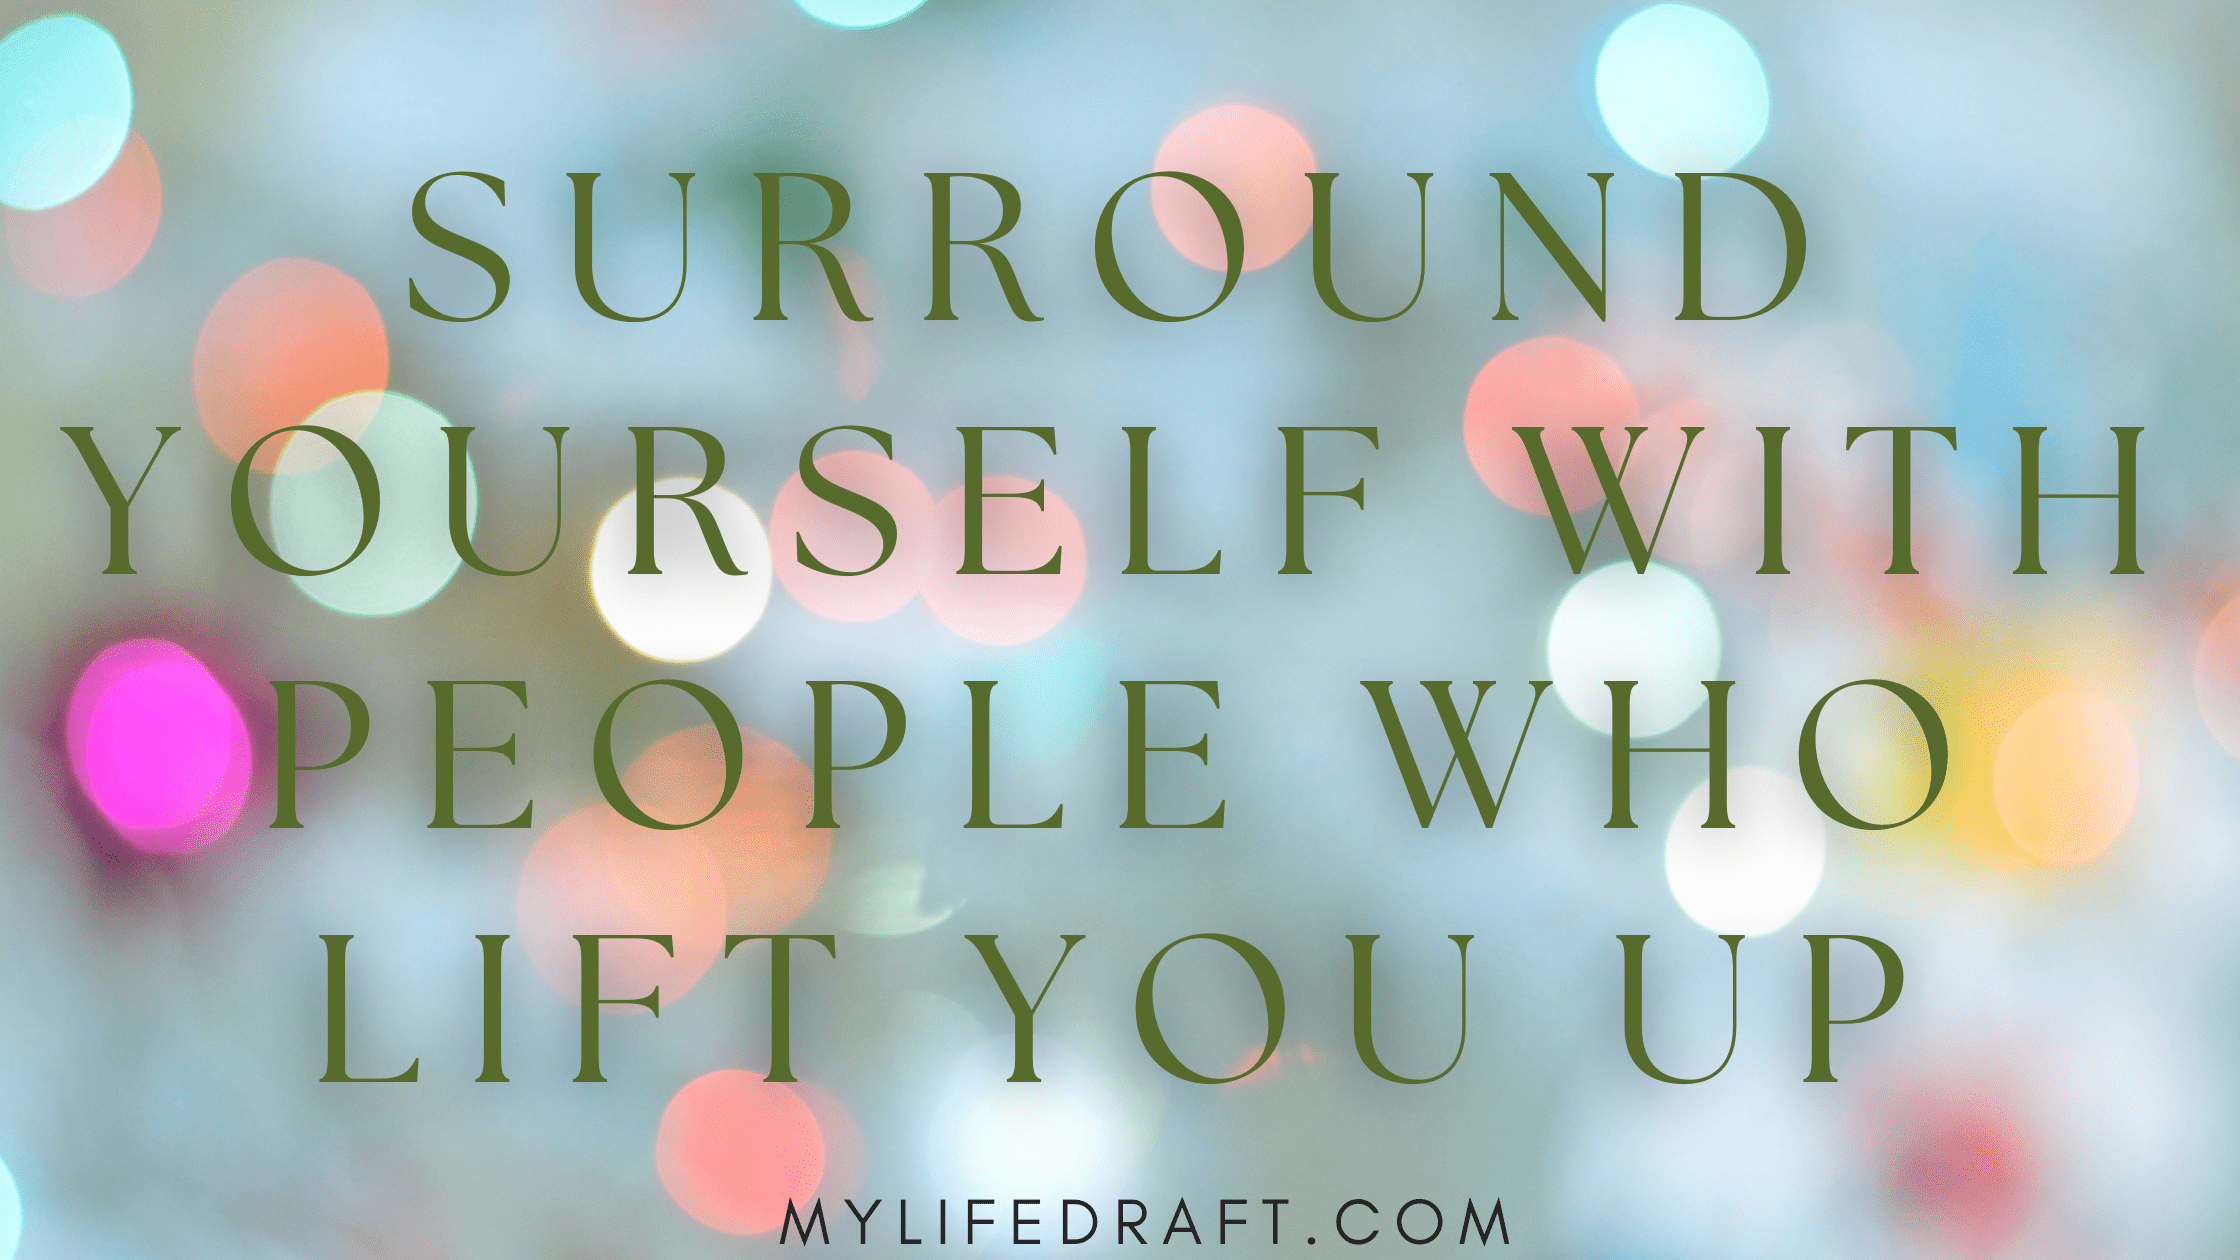 Surround Yourself With People Who Lift You Up